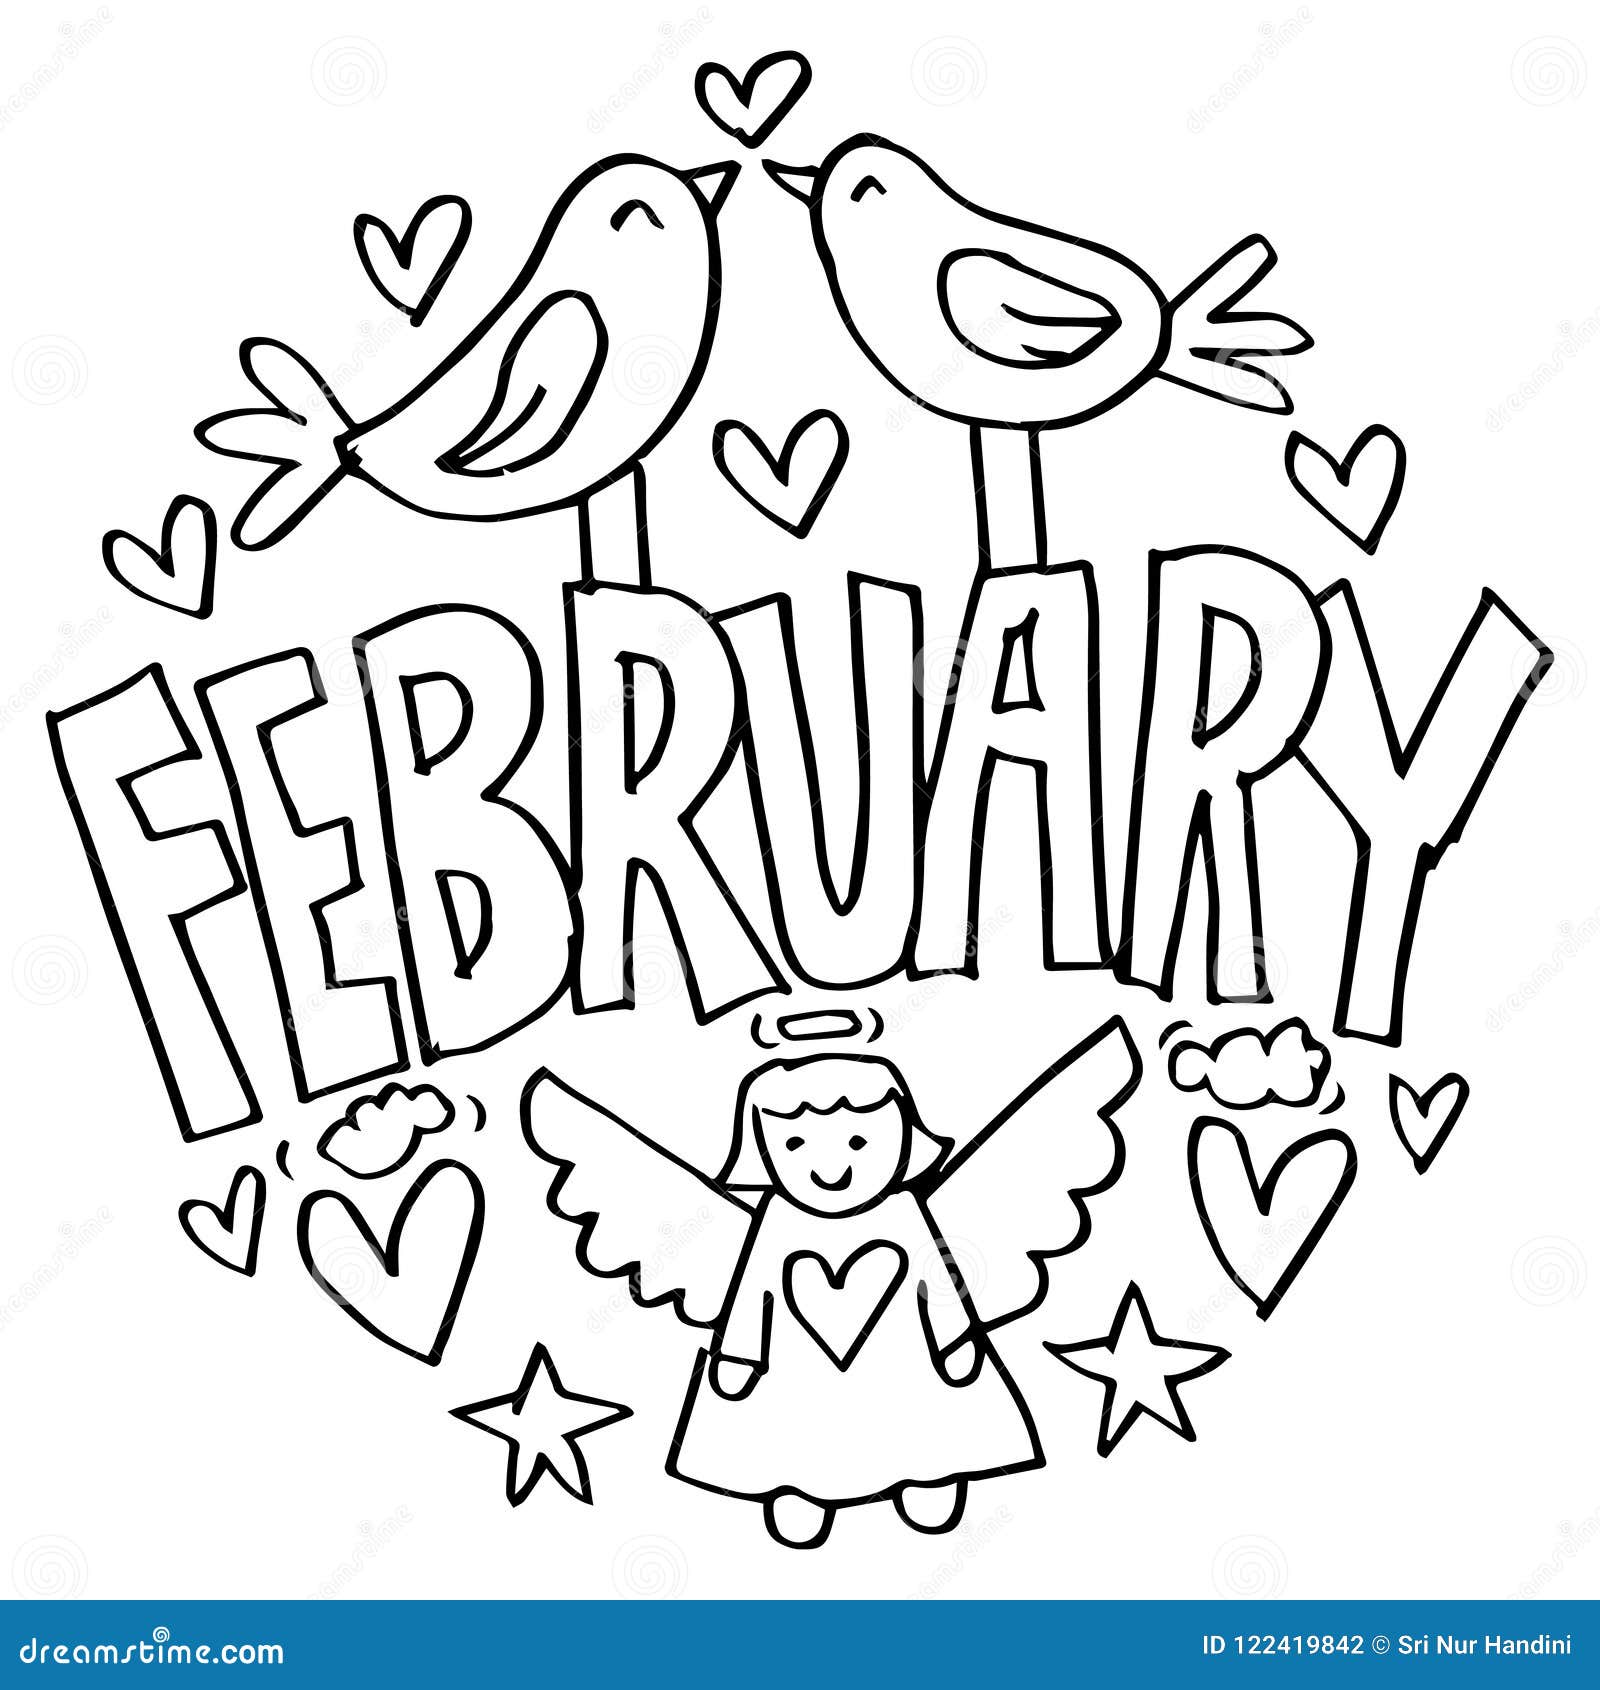 February coloring pages for kids stock illustration